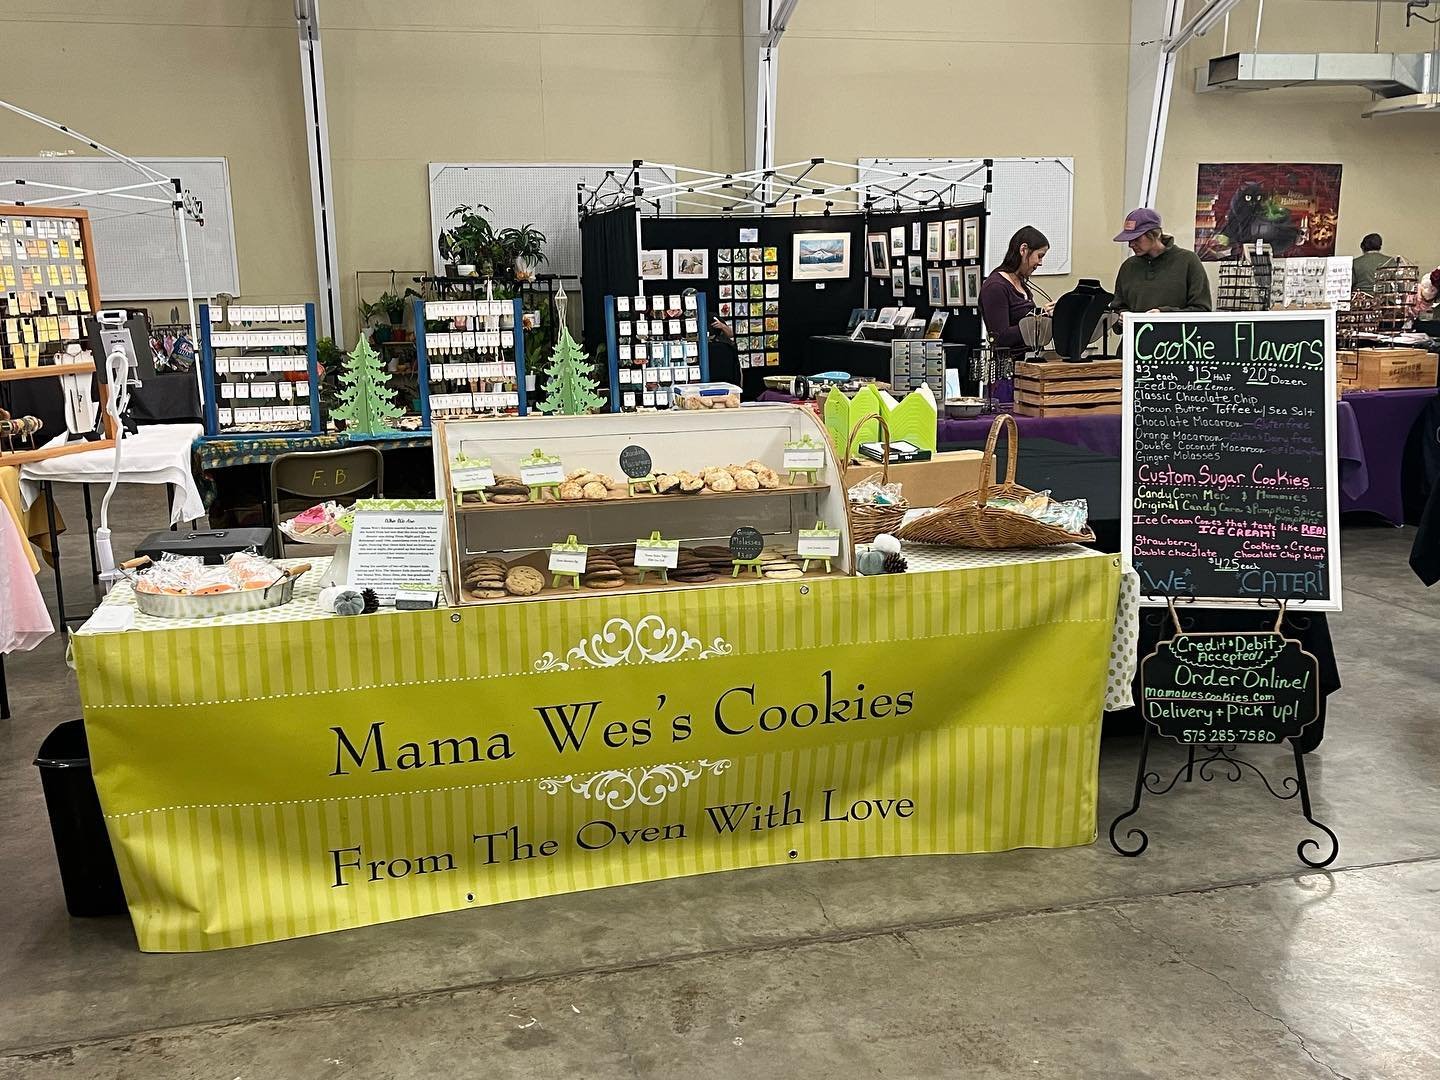 Hood River Harvest Craft Show! Come and see us and get your customs sugar cookie! 
Hood River Fair Grounds 
Today 10-5 and Tomorrow 10-4